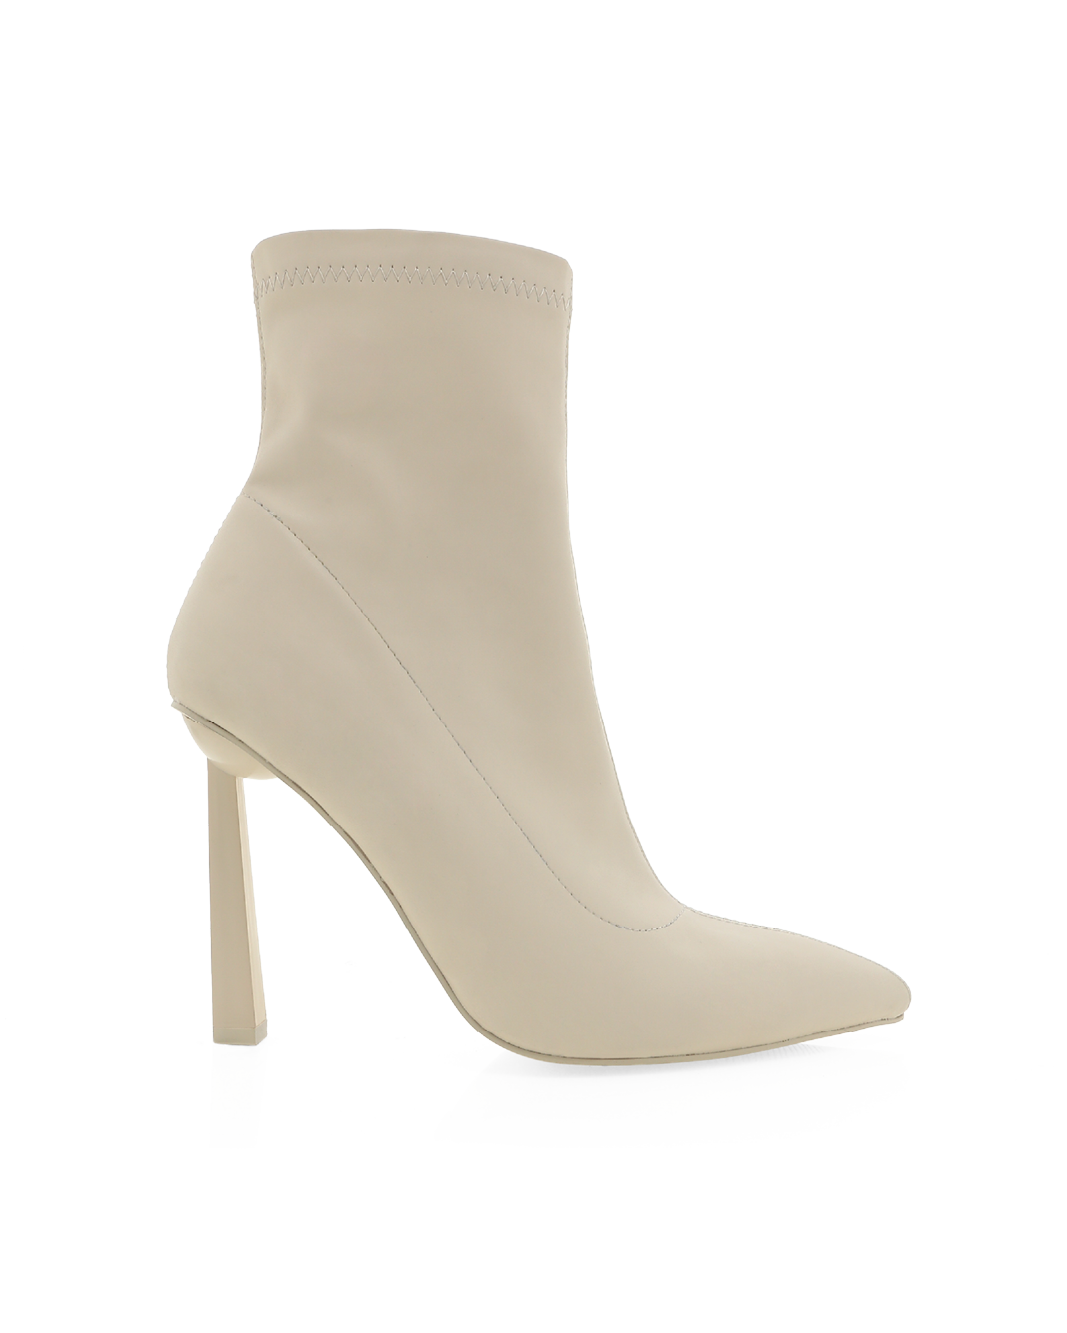 Women's Shoes, Sandals, Boots, Heels and More | Billini USA